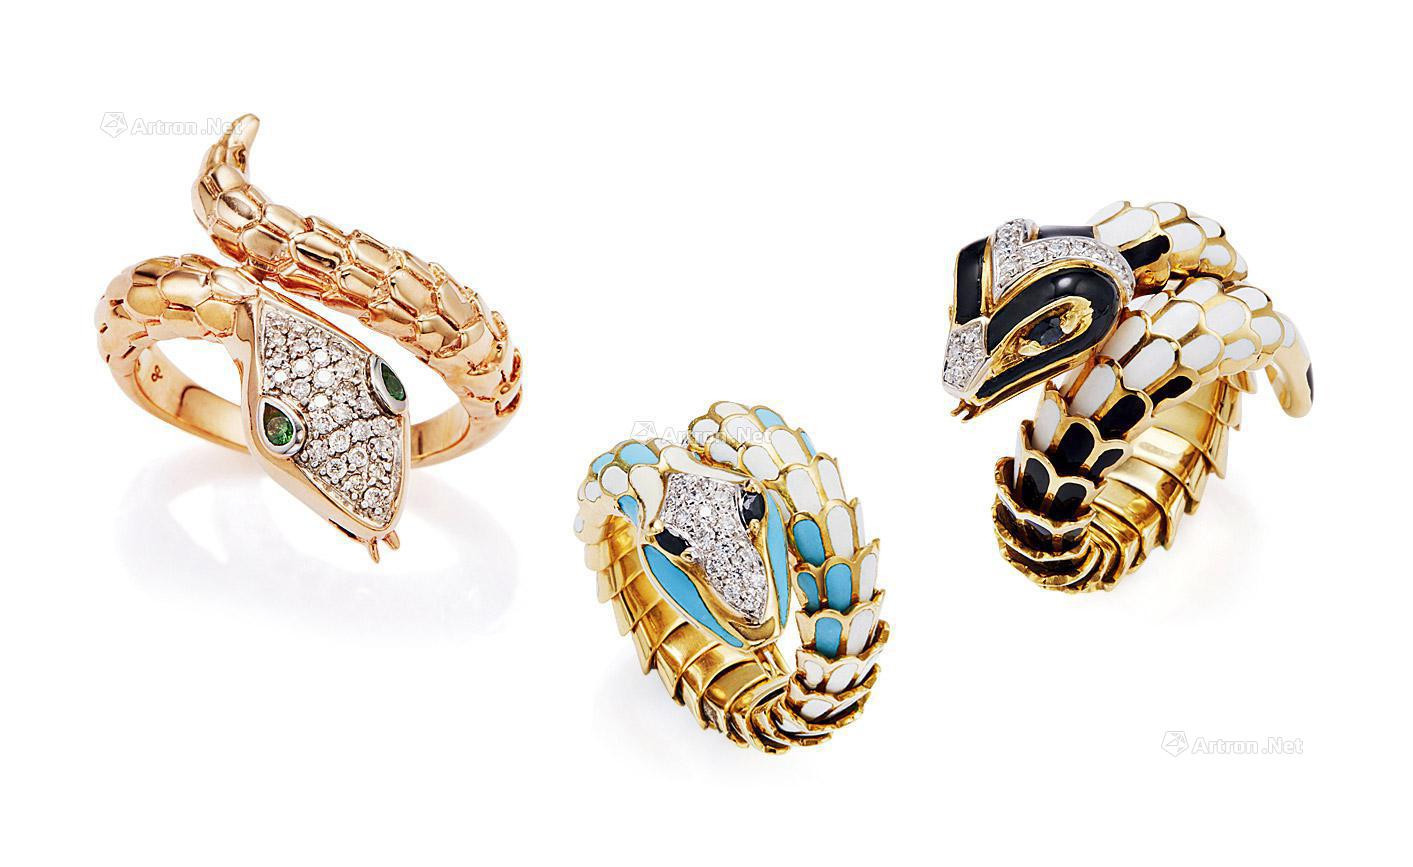 A SET OF ENAMEL AND DIAMOND ‘SNAKE’ RINGS MOUNTED IN 18K GOLD